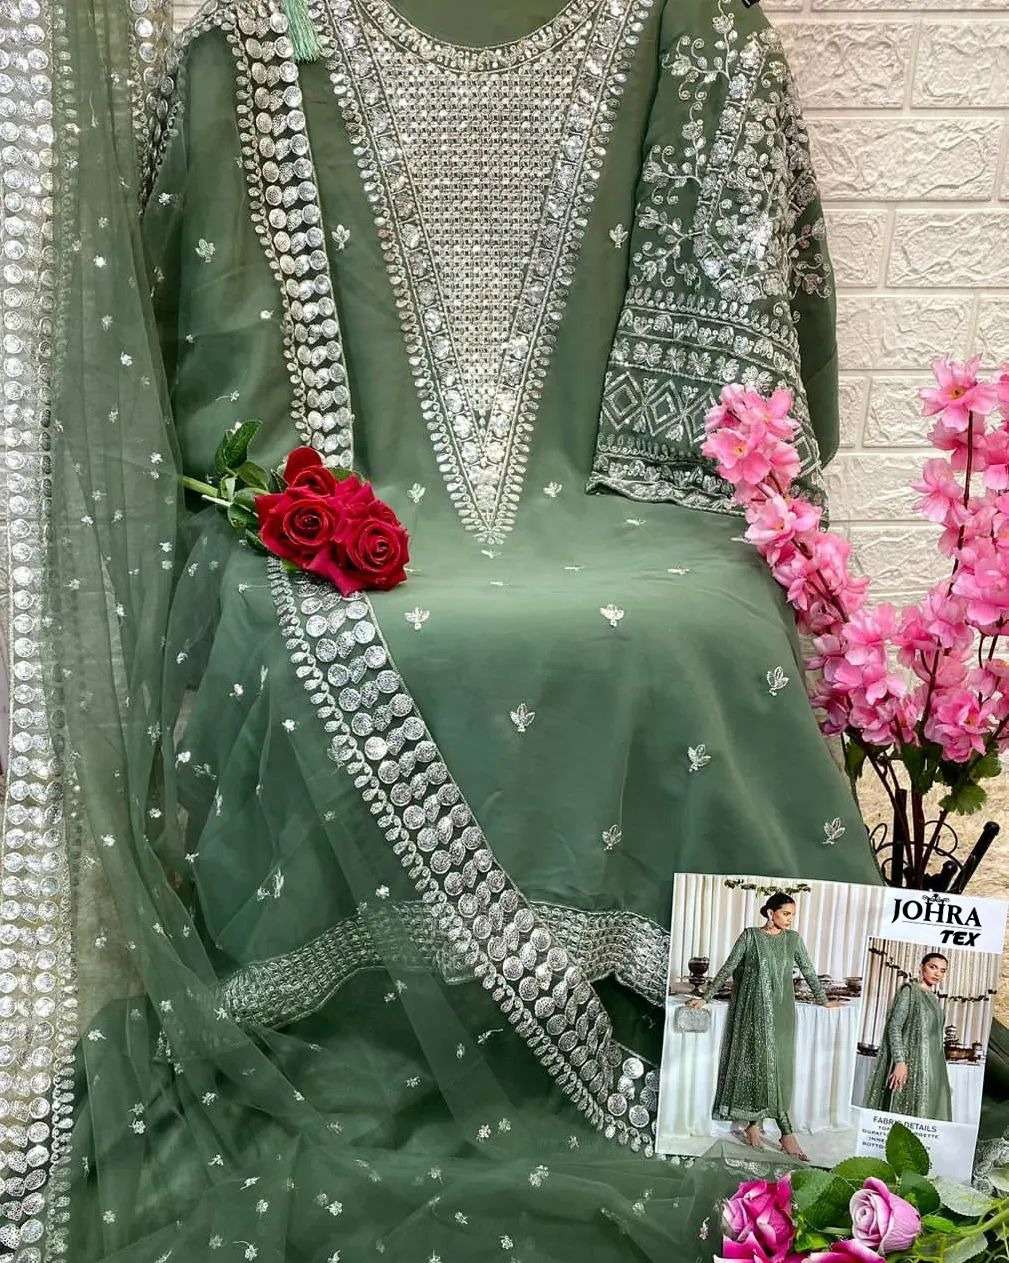 Johra Hit Design 117 By Johra Tex Designer Suits Beautiful Fancy Colorful Stylish Party Wear & Occasional Wear Georgette Embroidered Dresses At Wholesale Price